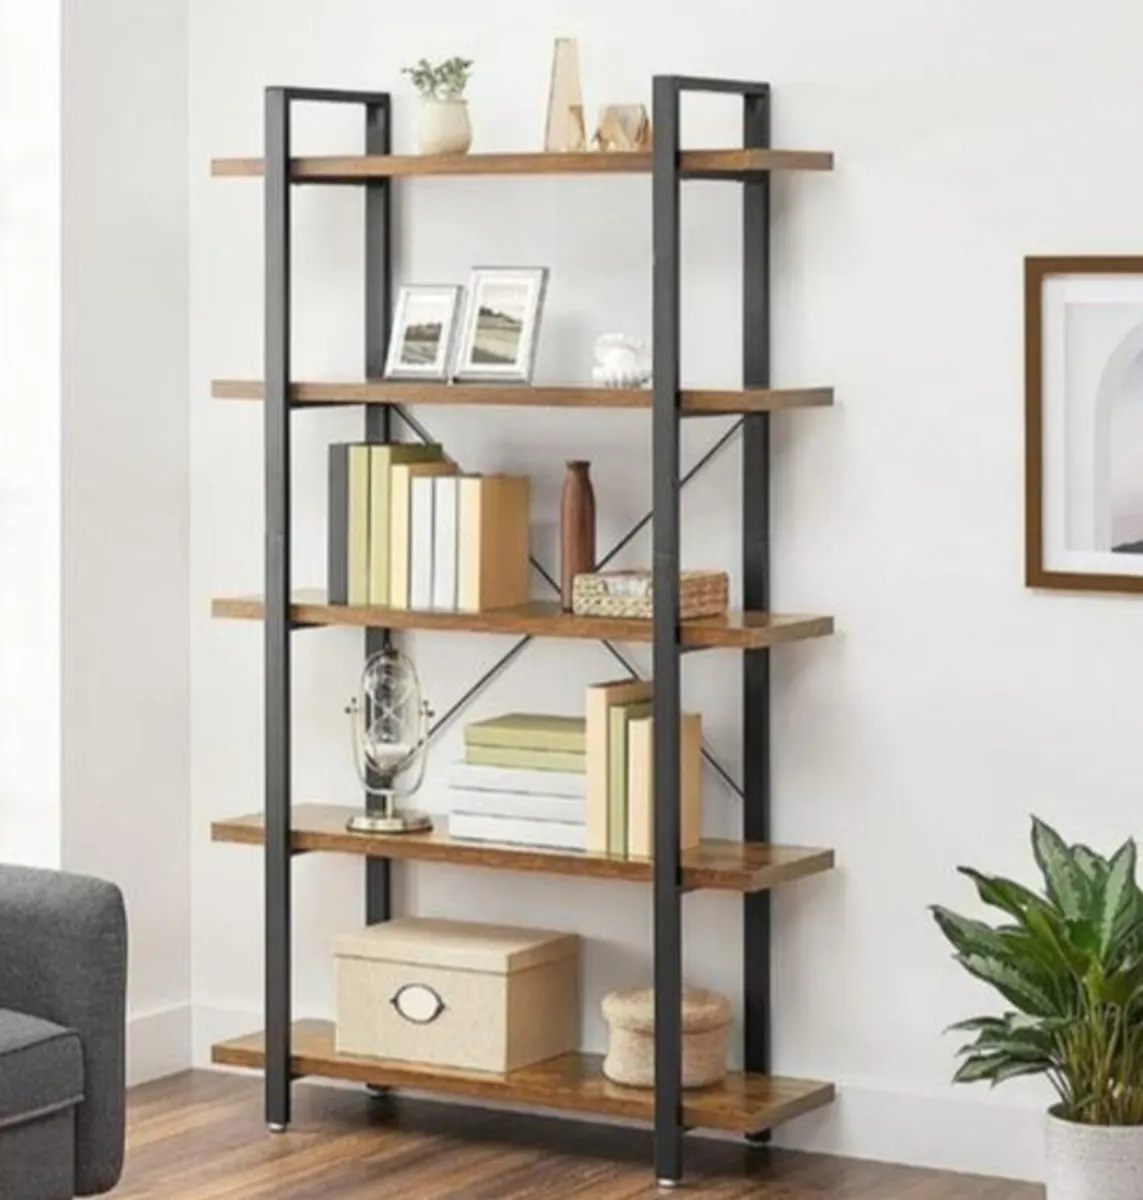 Sturdy 5 Tier Industrial Style Shelving Unit - Image 1